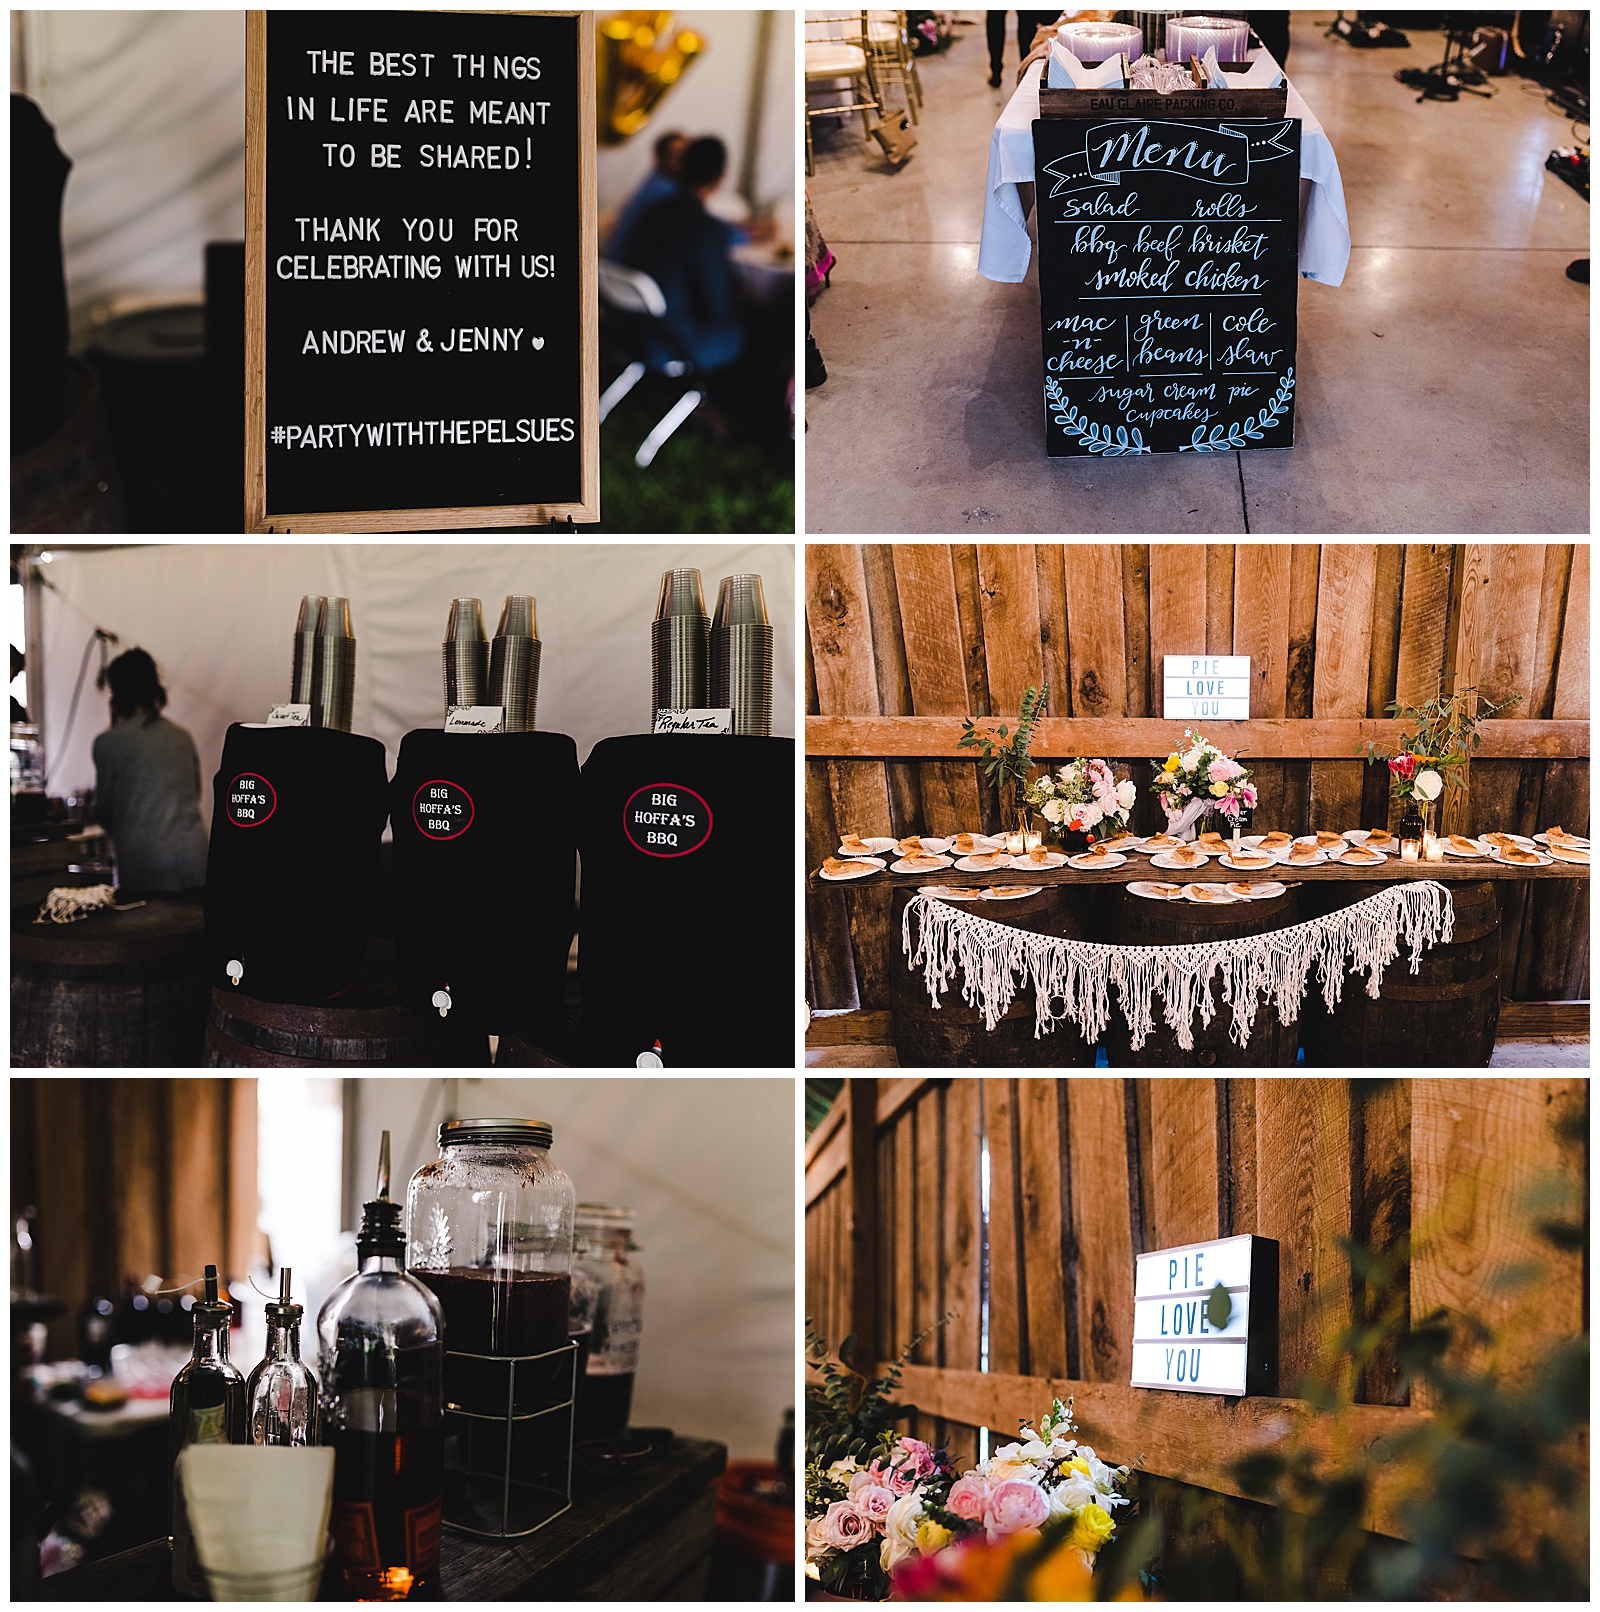 Bohemian chic wedding signs and details at the reception.